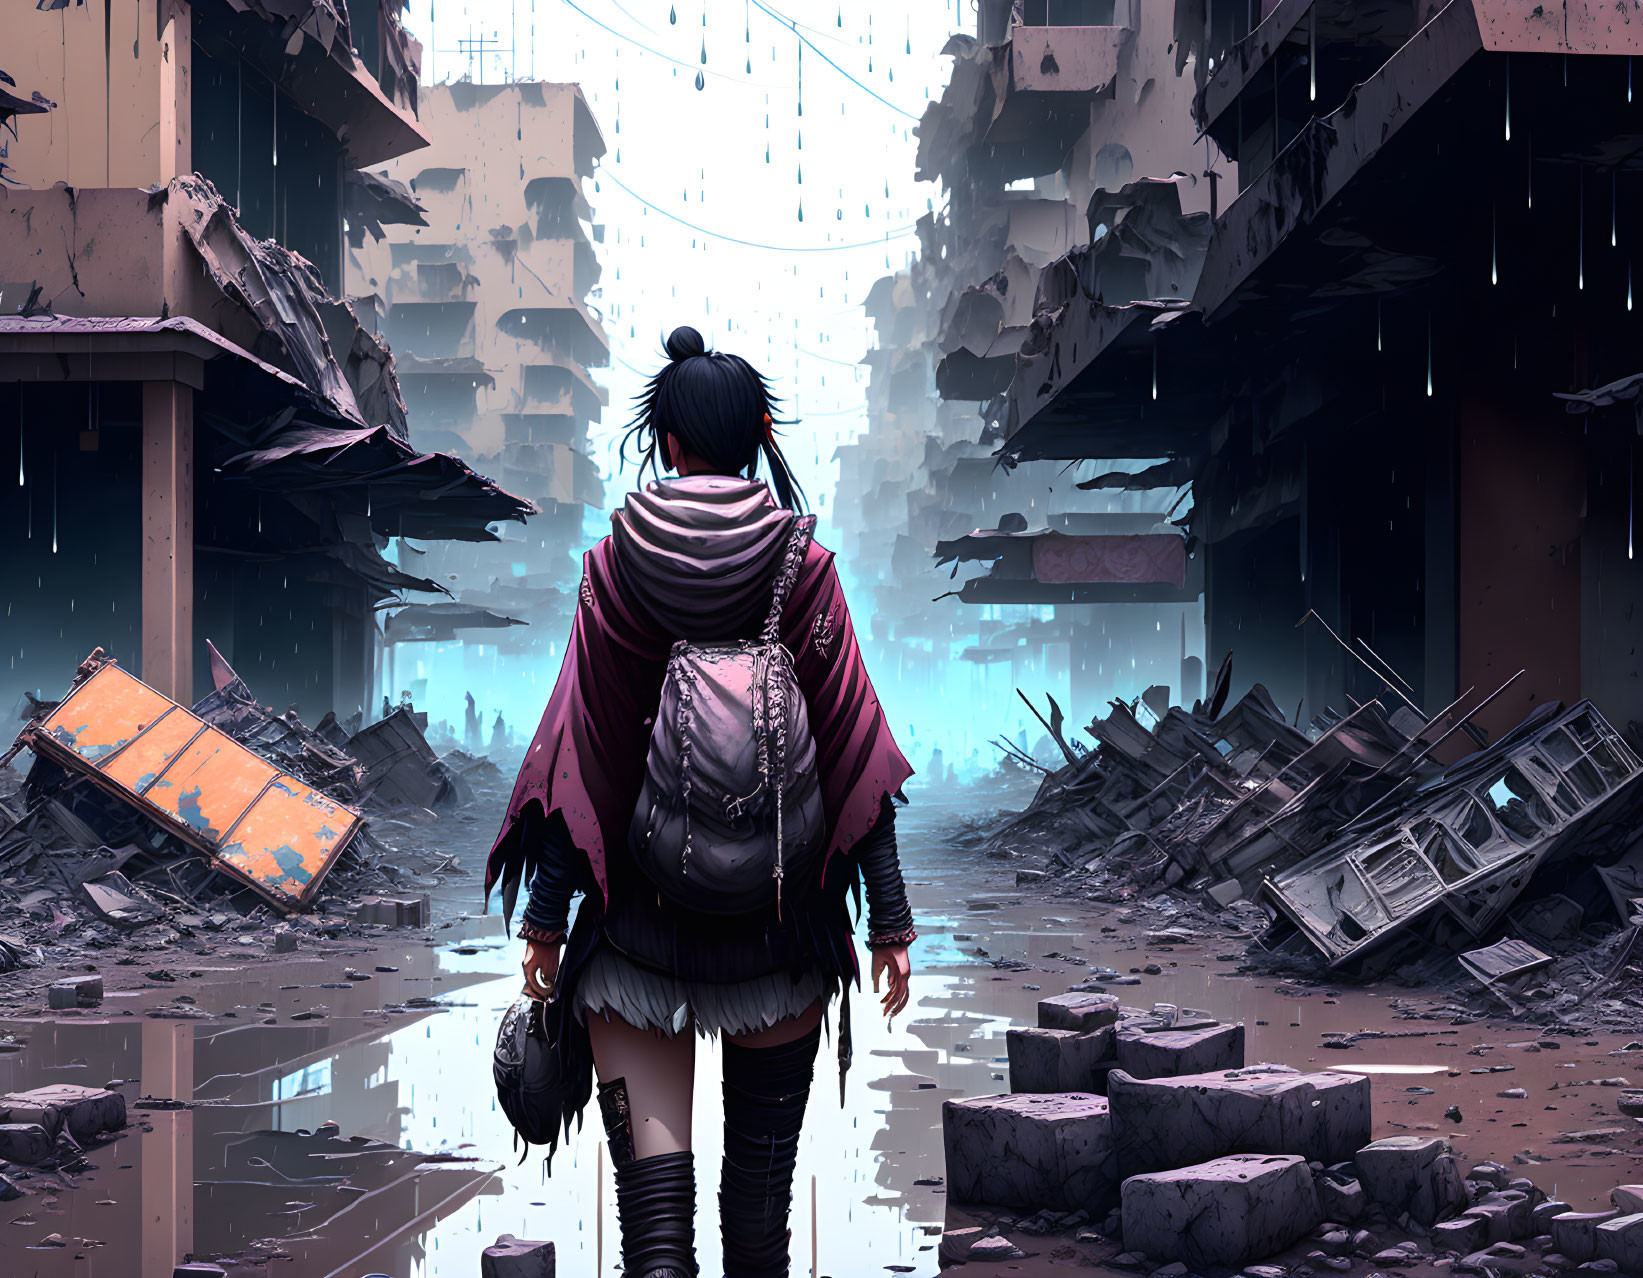 Person standing amidst ruins in dilapidated cityscape under gloomy sky